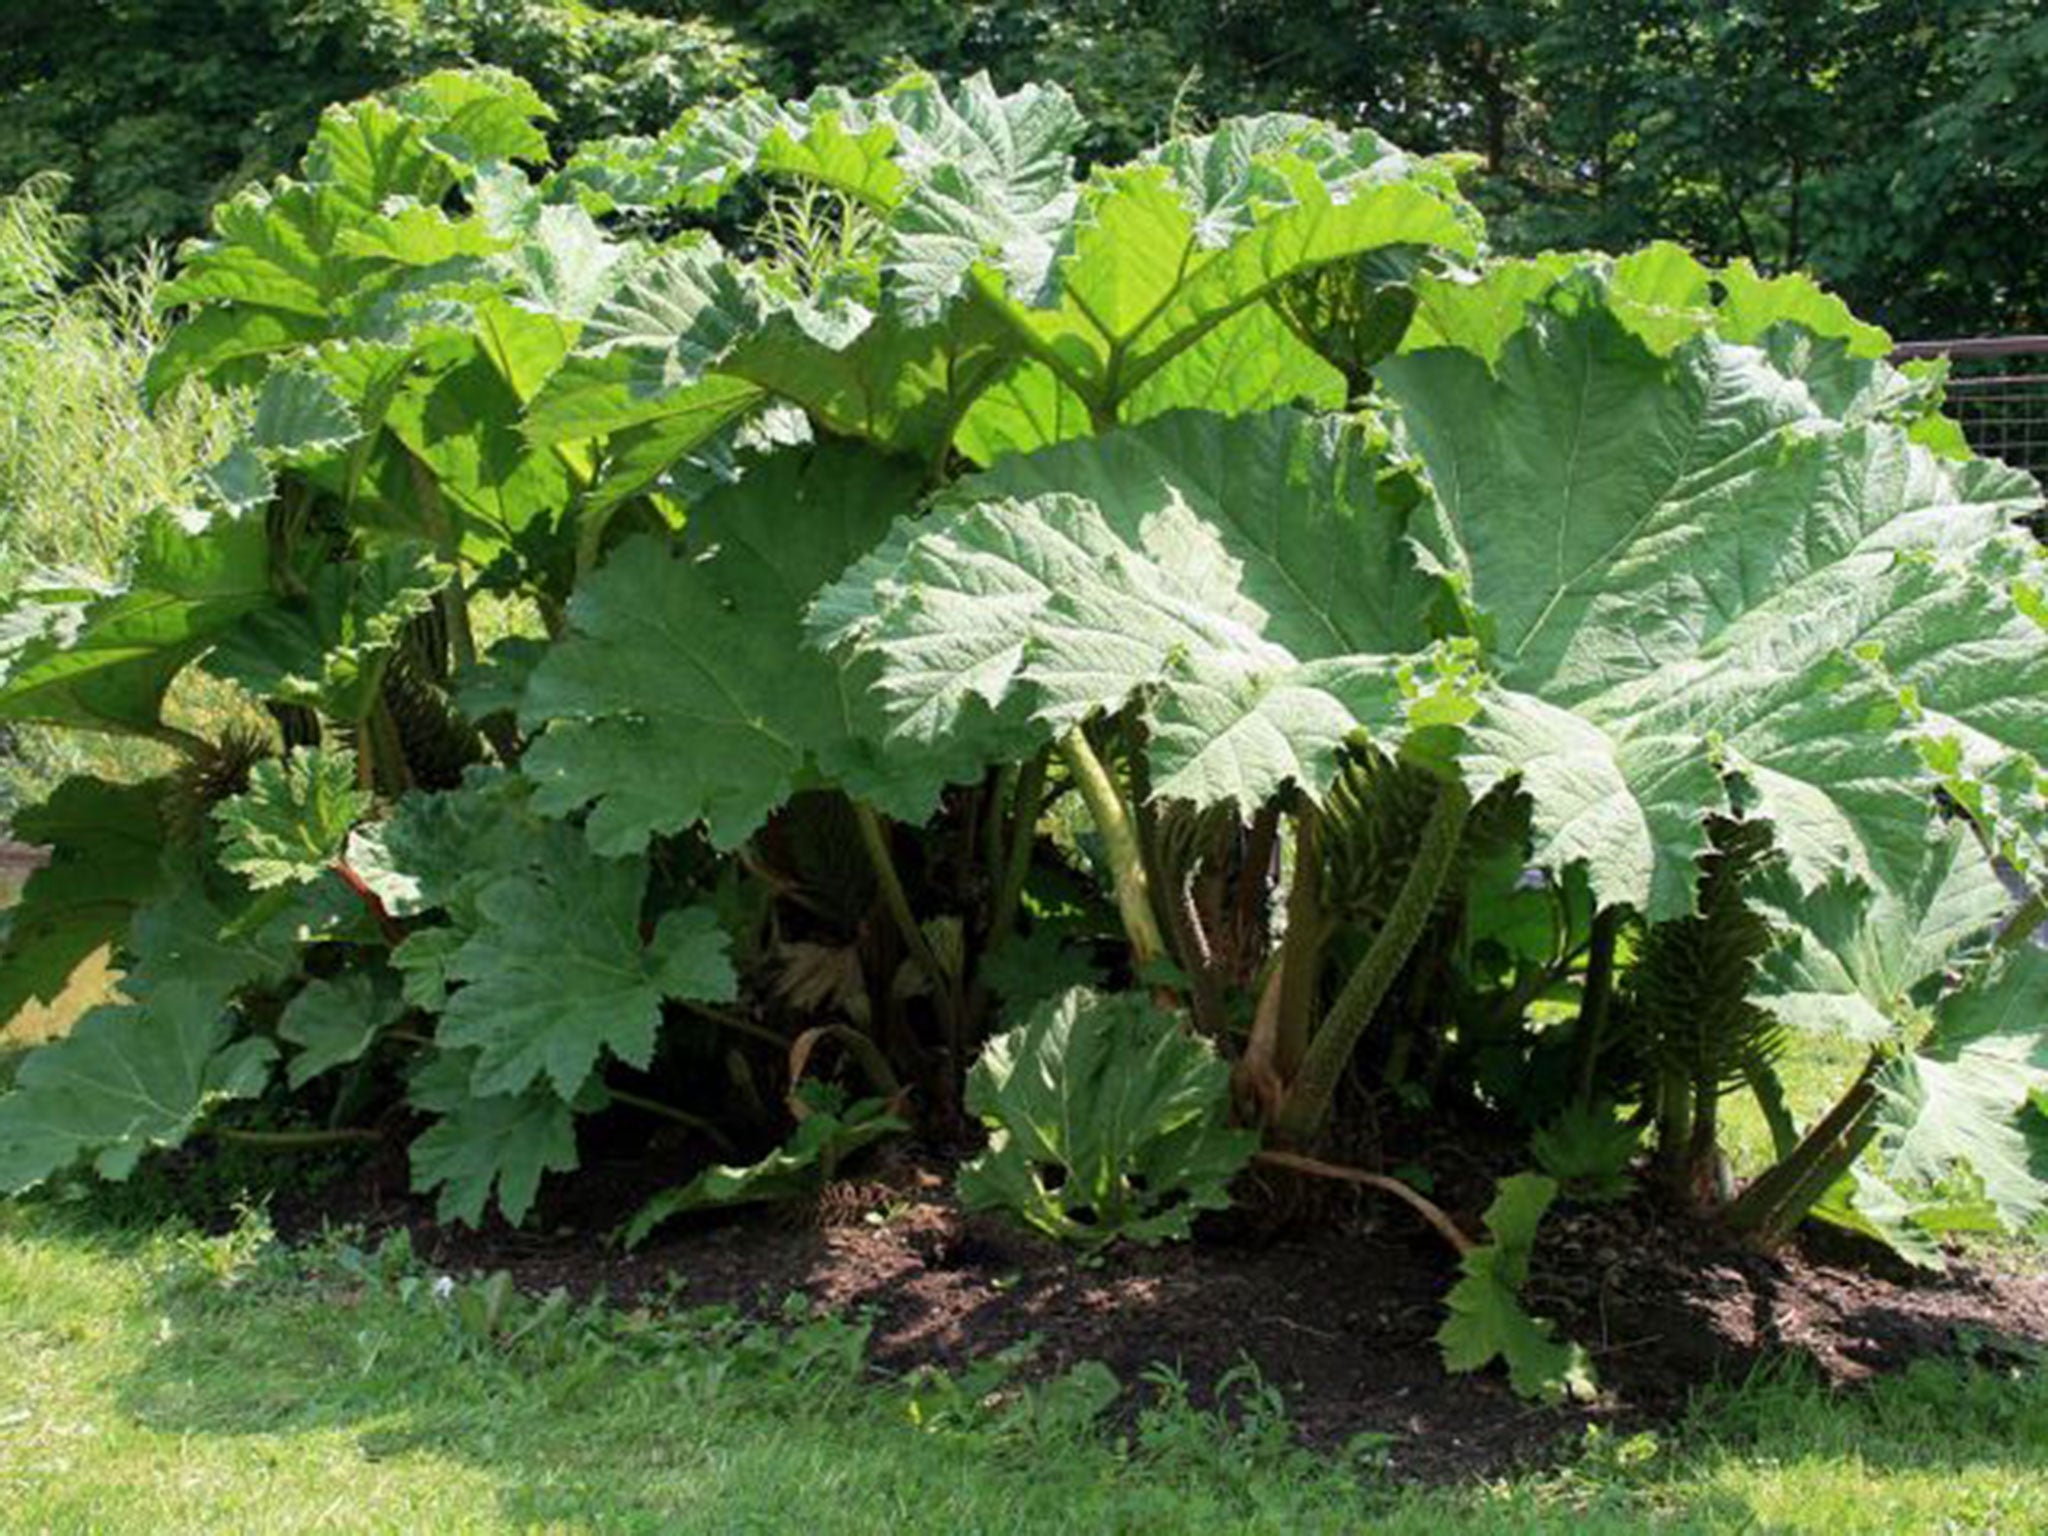 Giant Rhubarb can grow up leaves up to 1.8m wide and ruin farmland